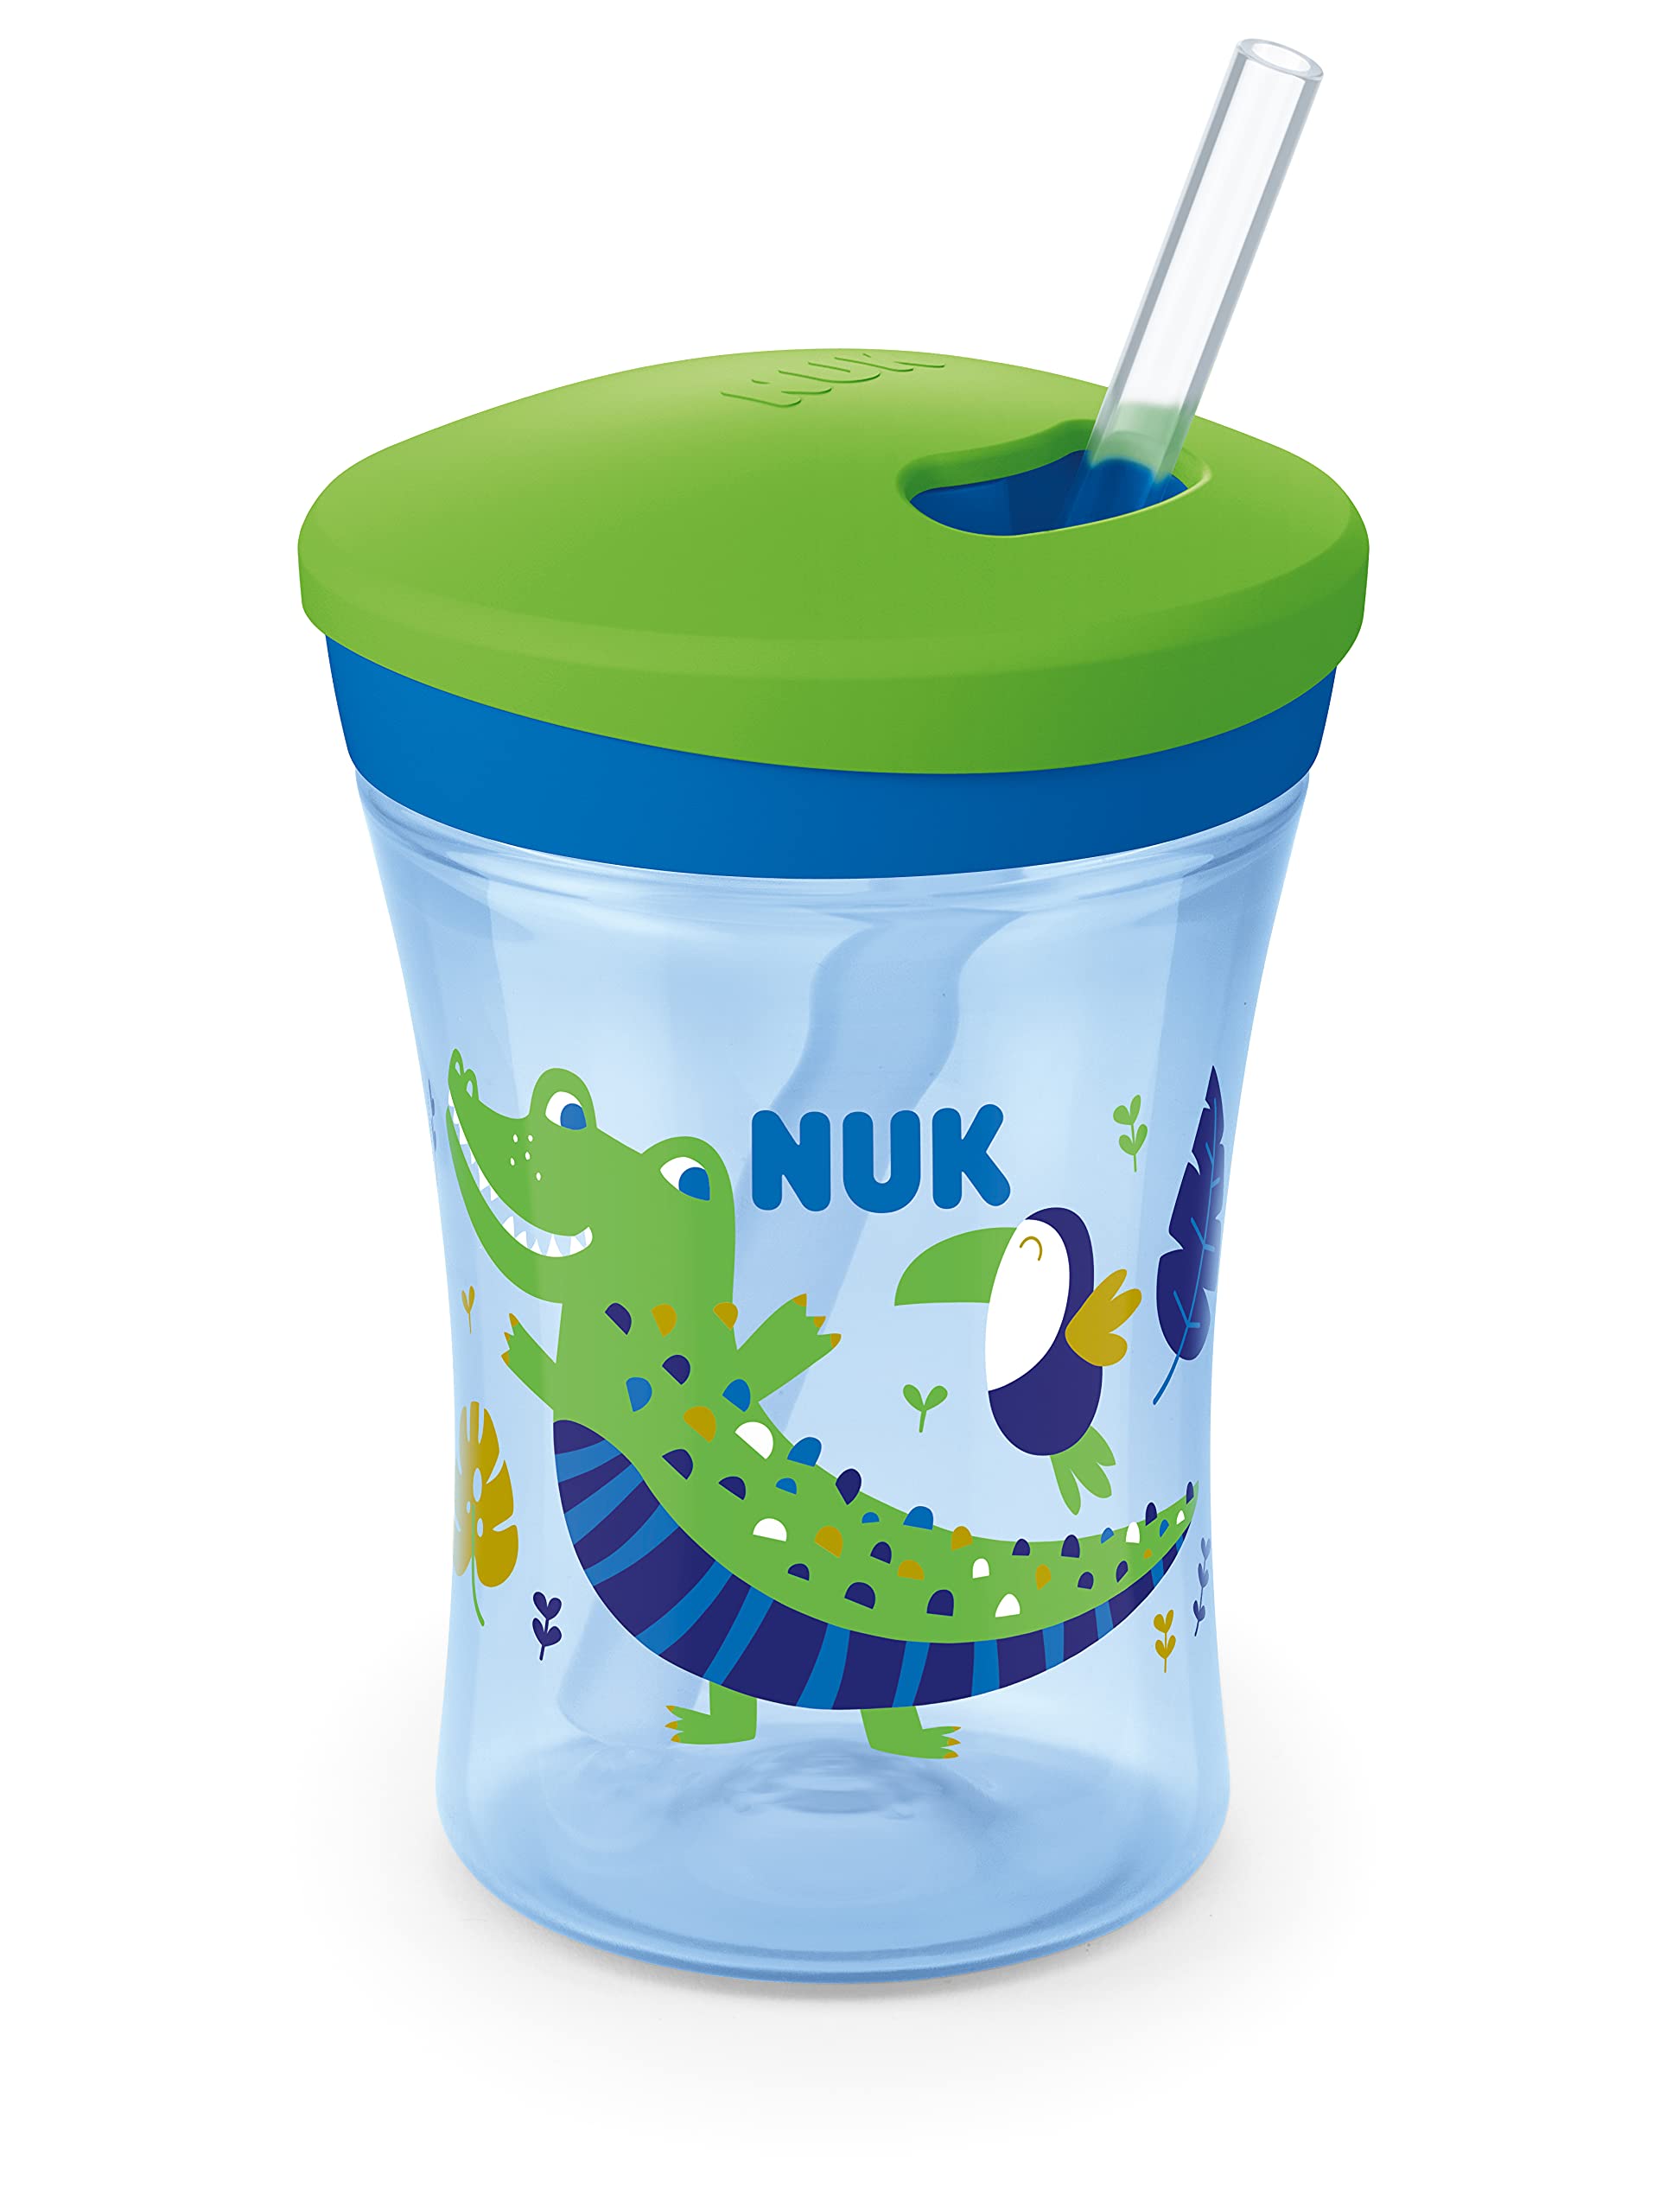 NUK Action Cup Toddler Cup with Chameleon Effect, 12+ Months, Colour Changing, Twist Close Soft Drinking Straw, Leak-Proof, BPA-Free, Crocodile, Green, 230 ml